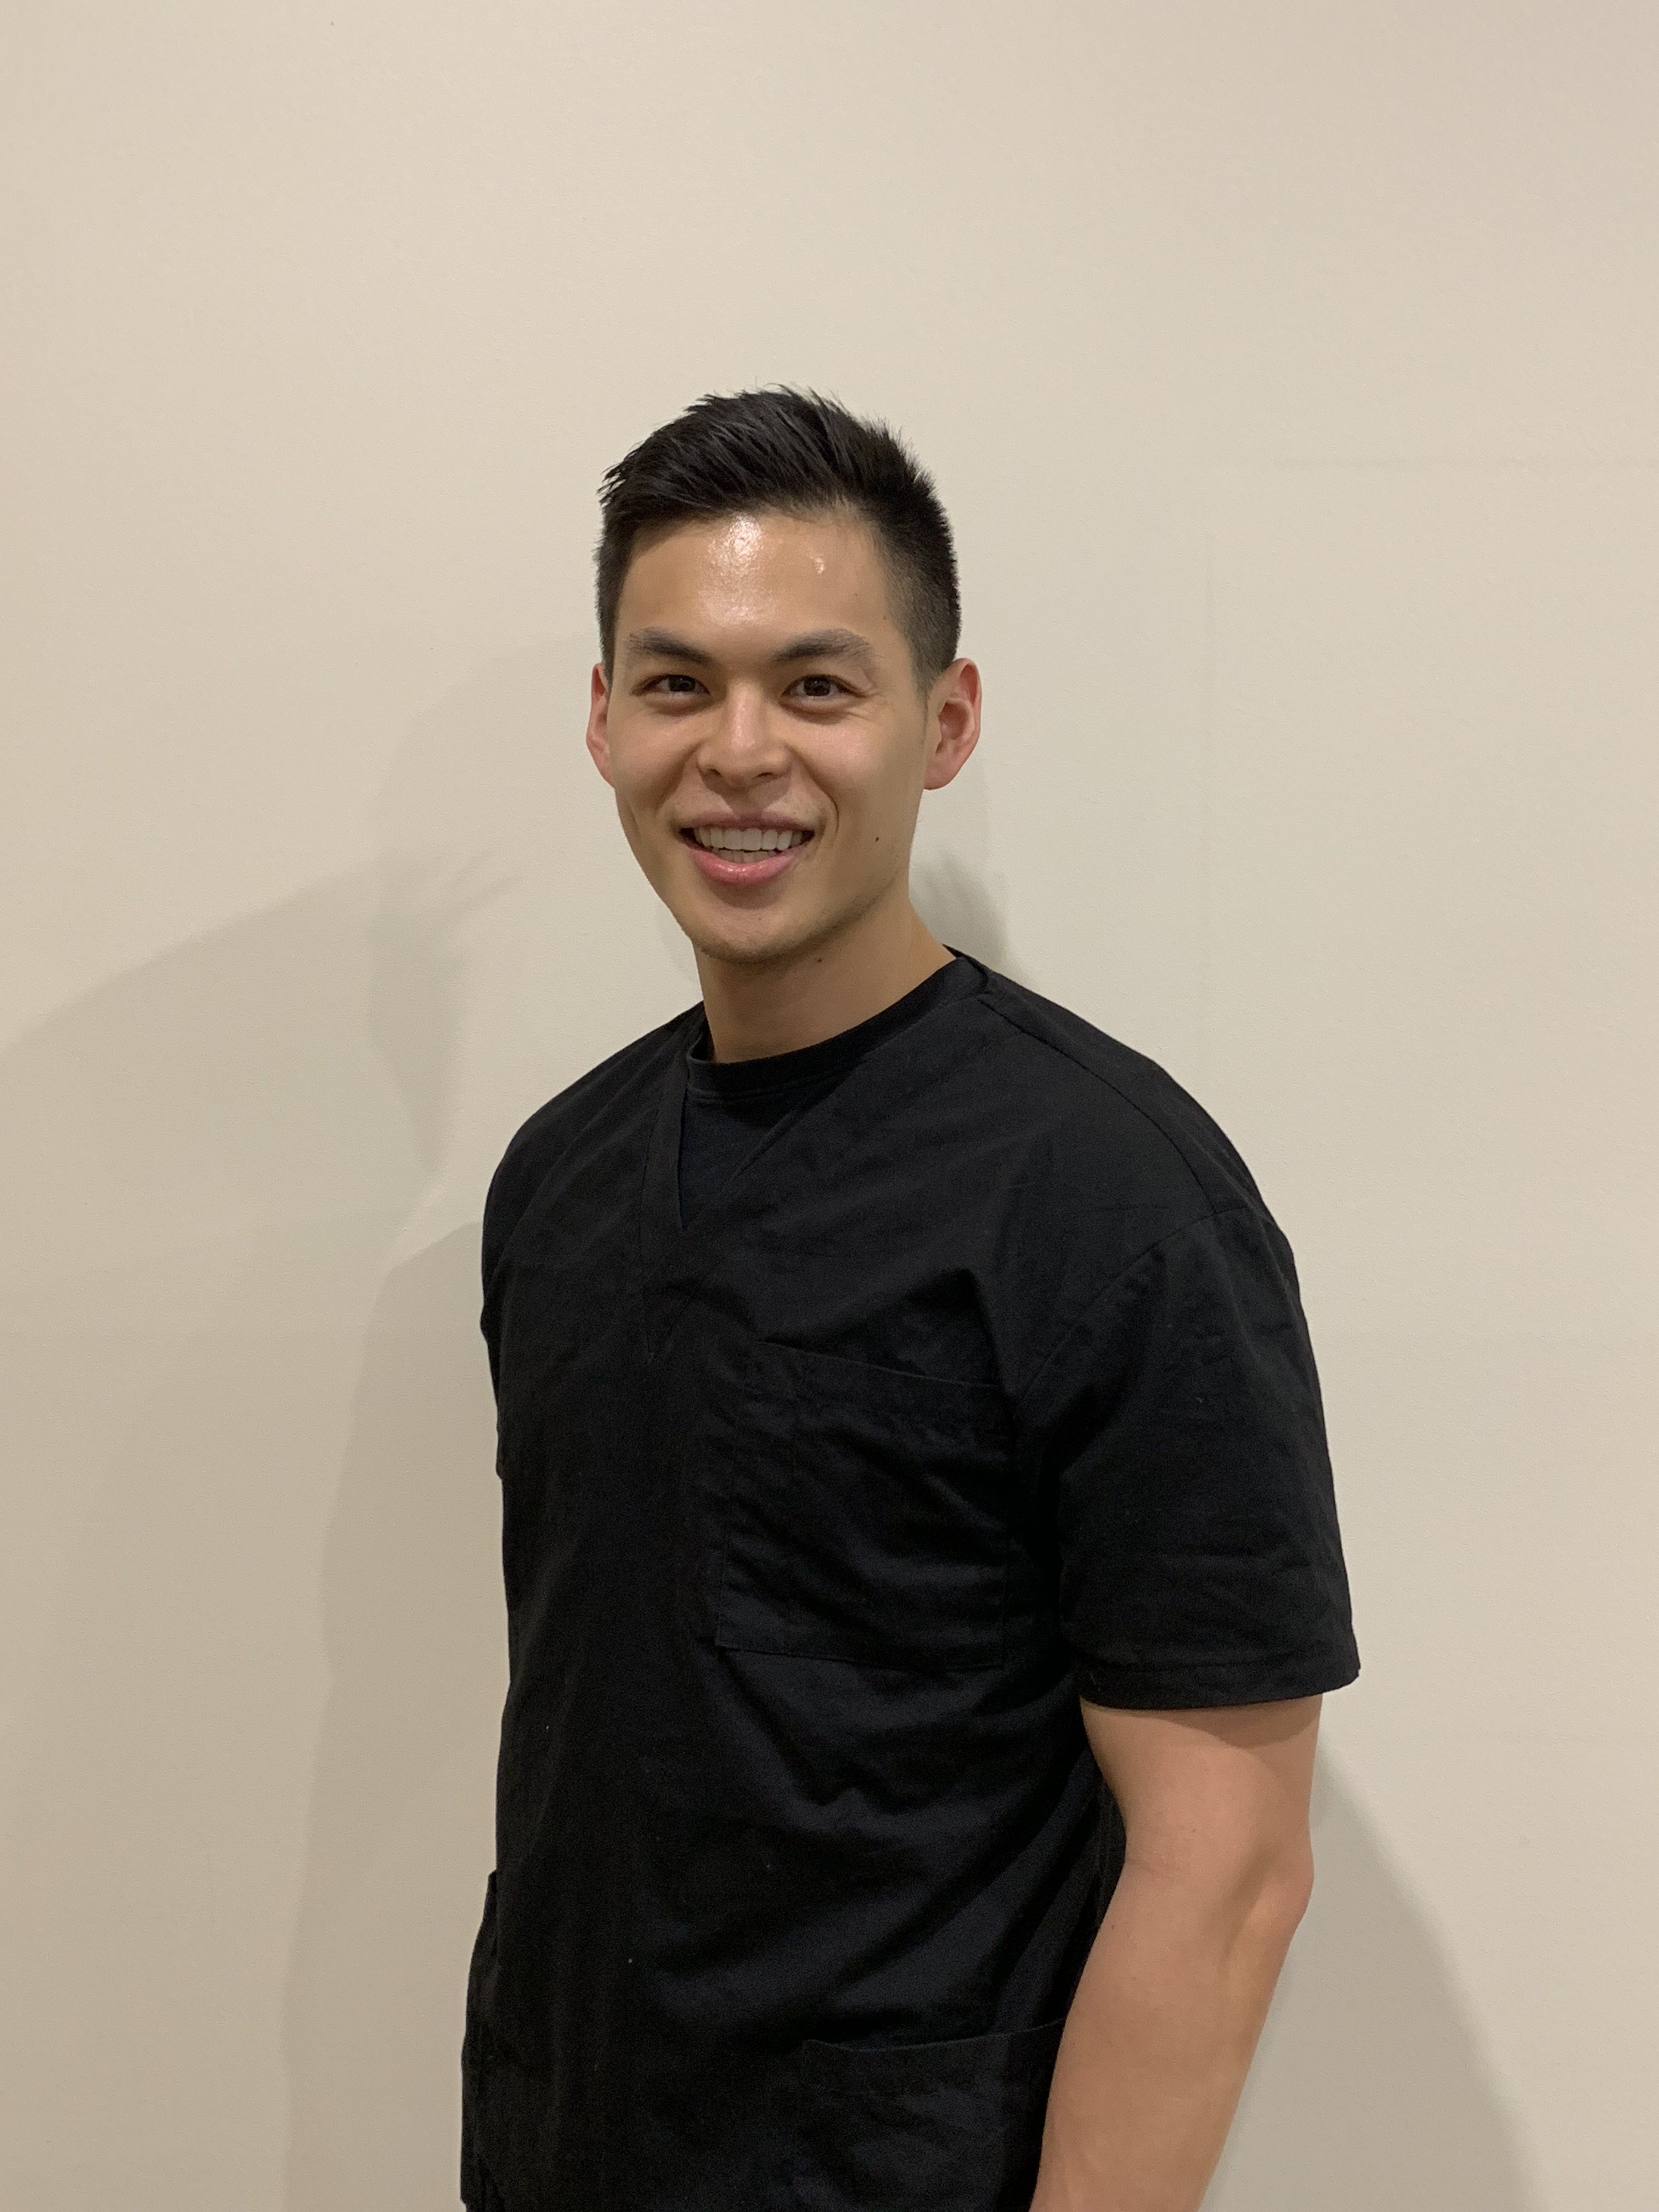 Dr Anthony Huang, a cosmetic dentist in Sydney